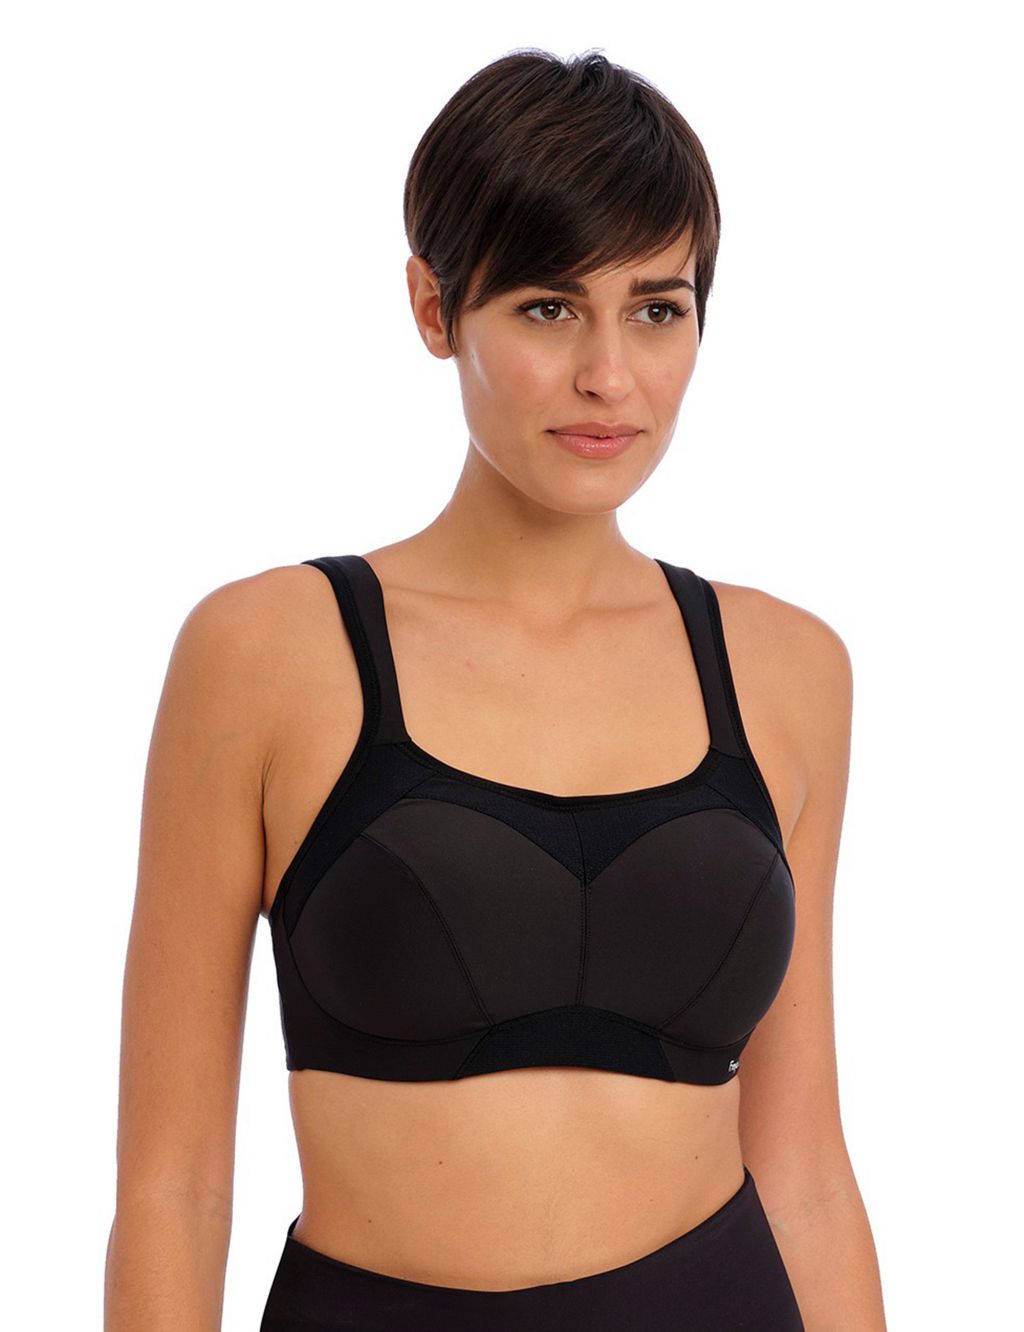 Shoppers are racing to M&S to snap up 'the perfect bra' in the store's mega  sale - it's just £6.50 & 'fits like a glove